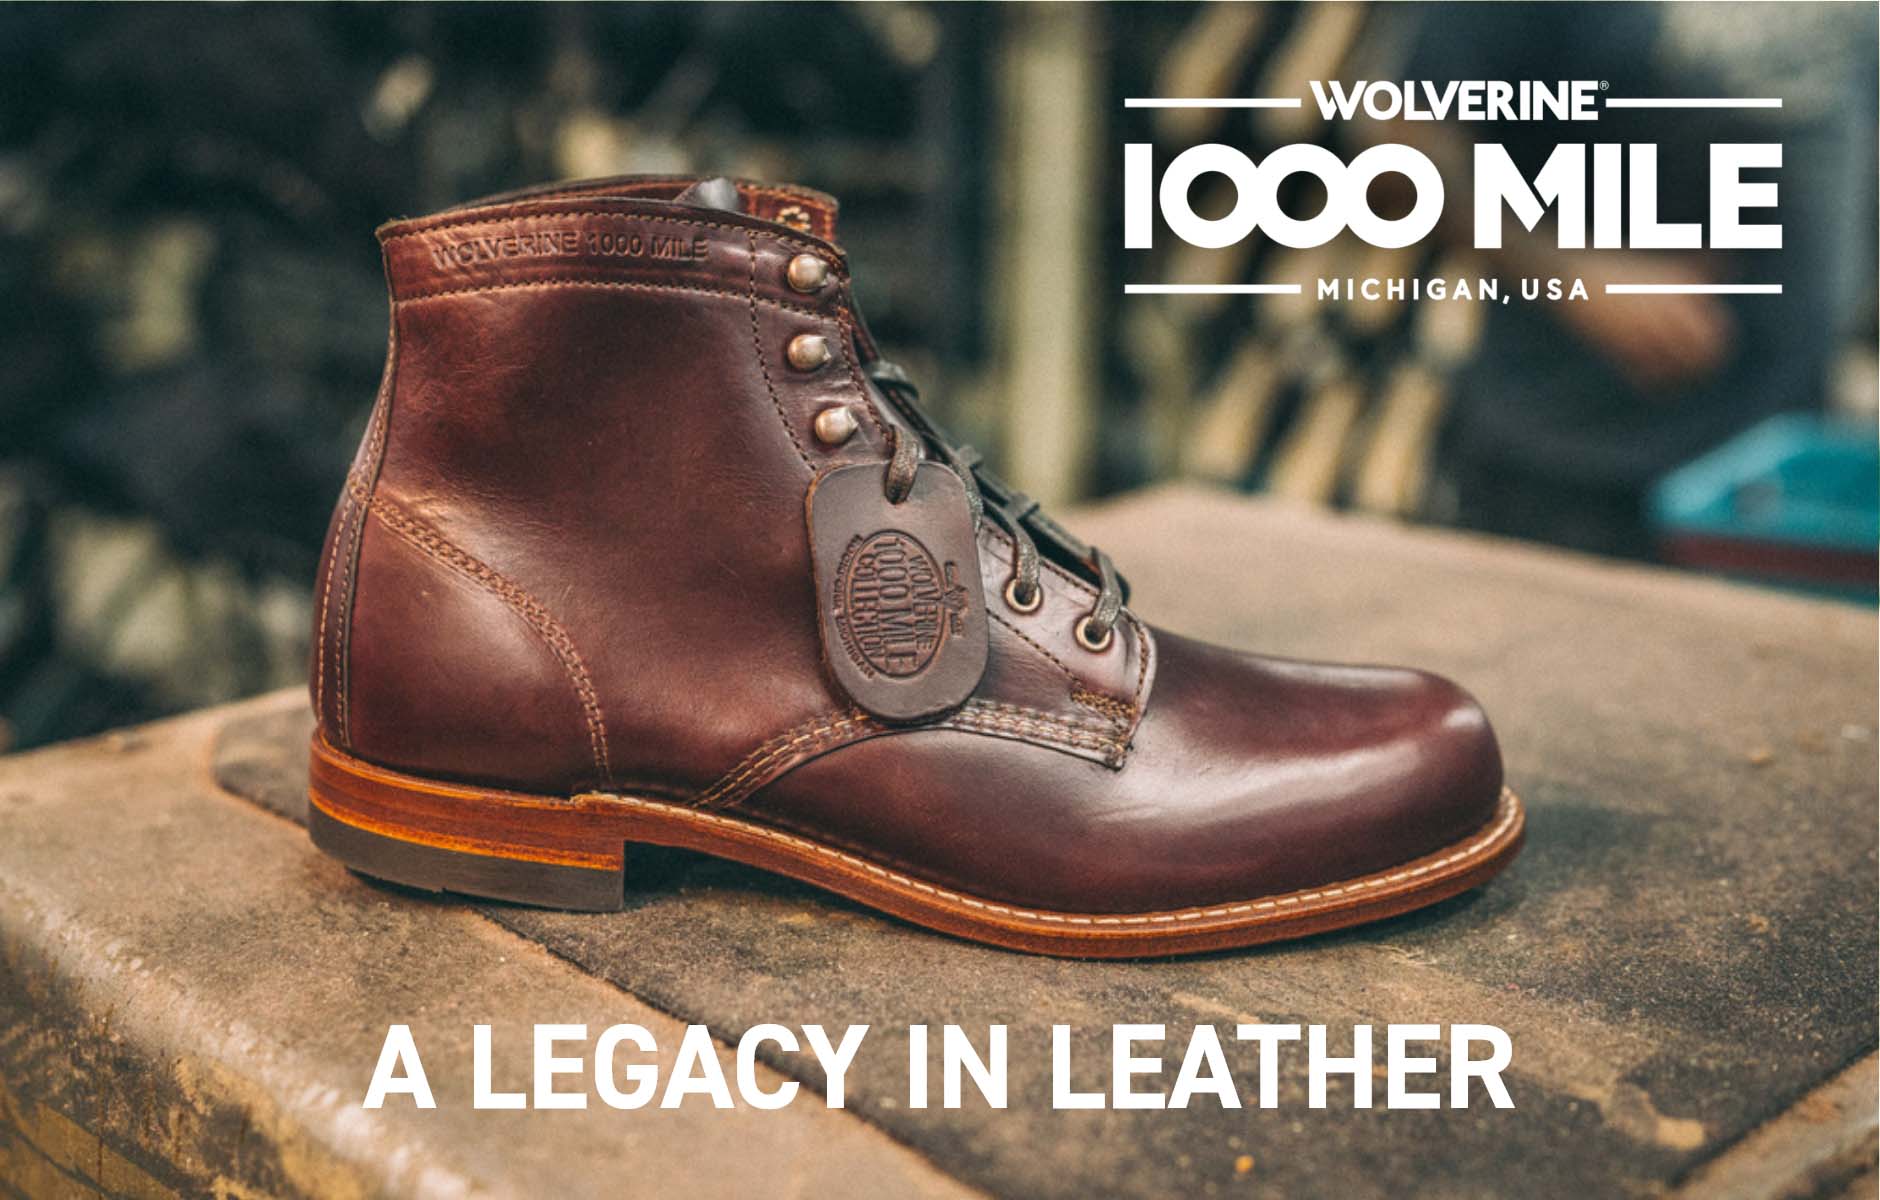 Wolverine 1000 Mile. The gift that goes for miles.